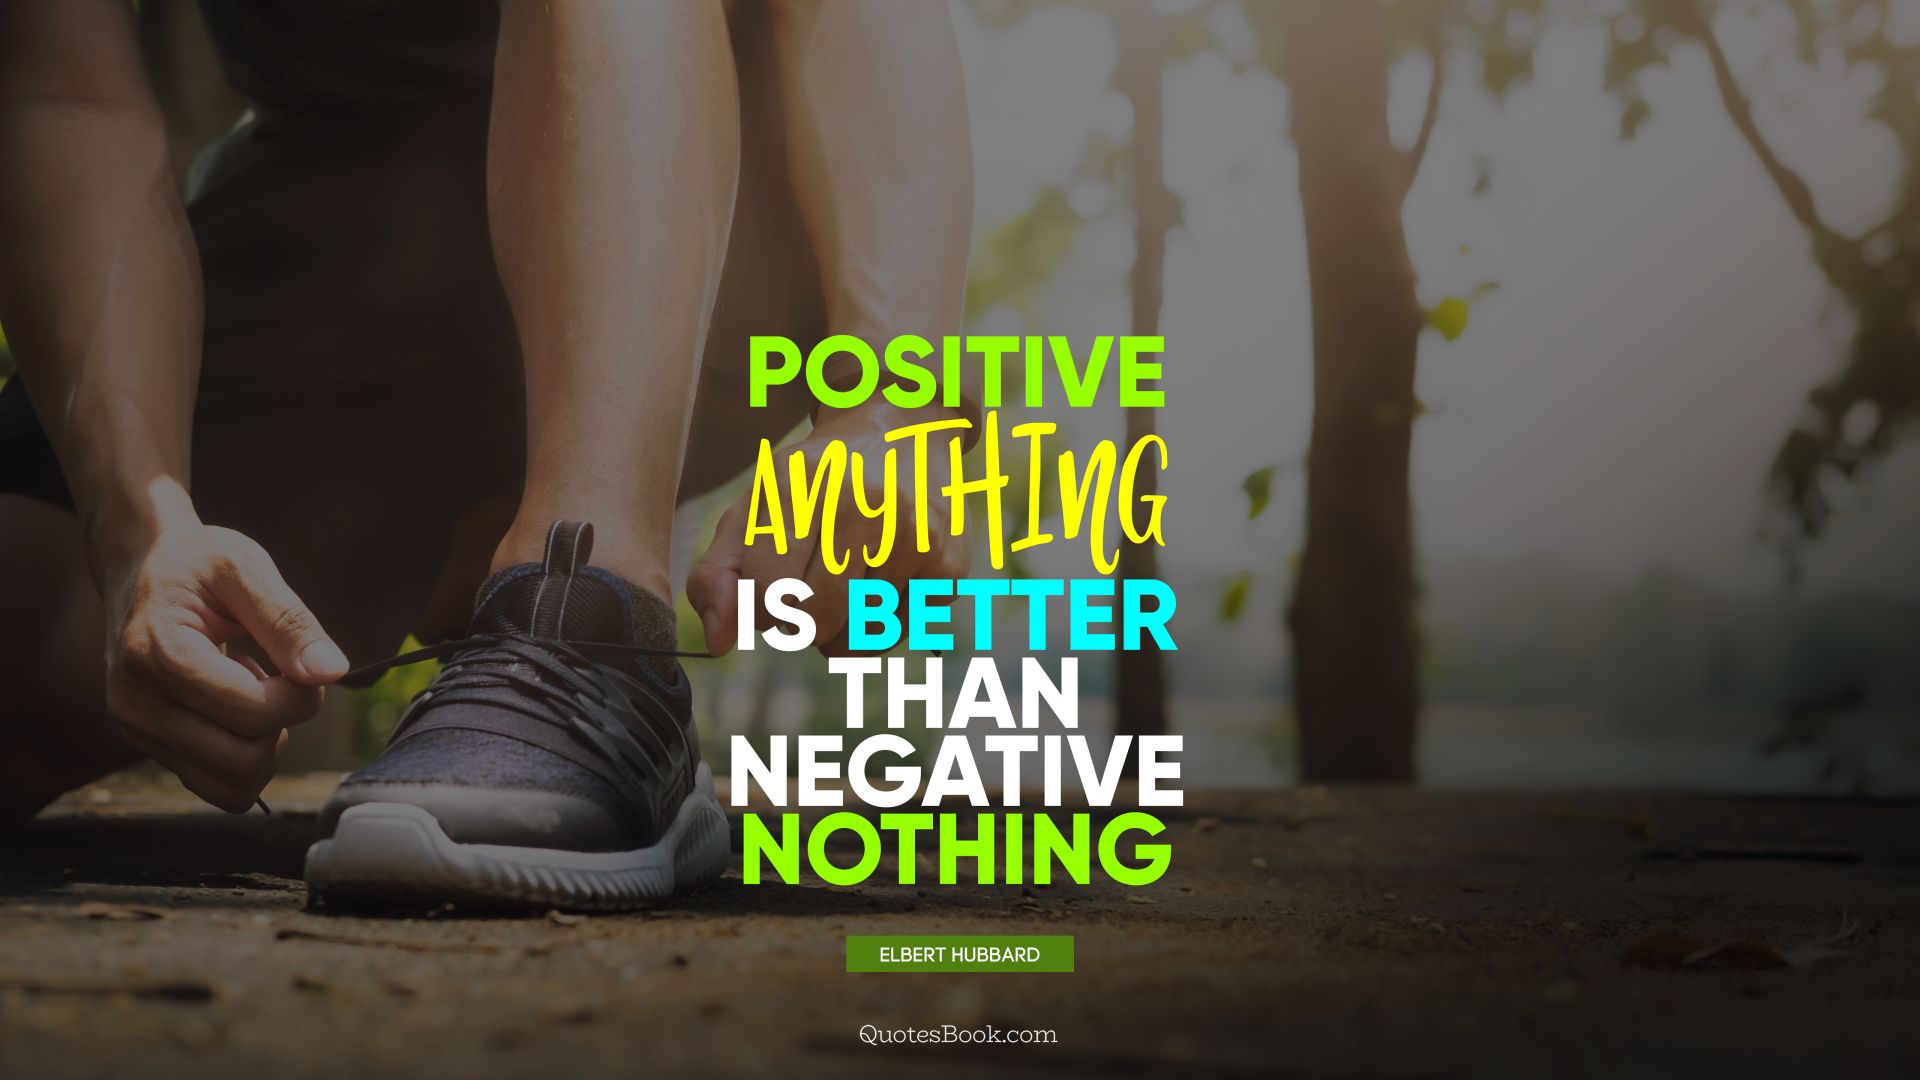 Positive anything is better than negative nothing. - Quote by Elbert Hubbard